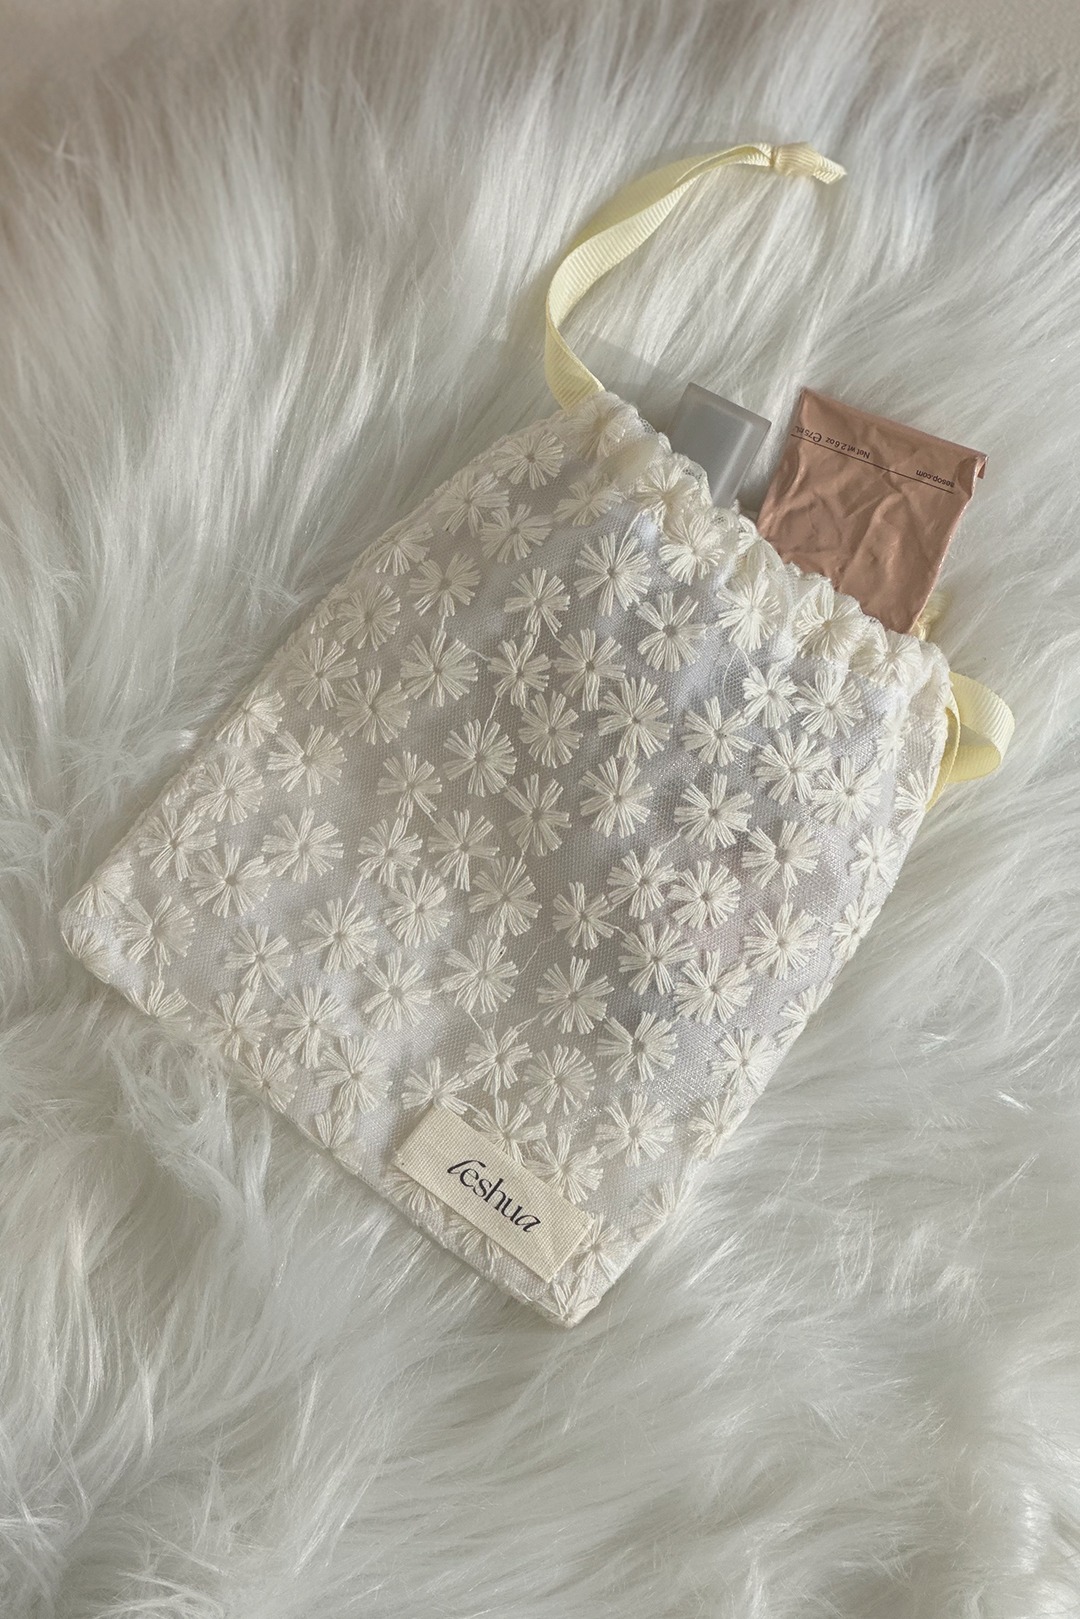 Daisy lace pouch